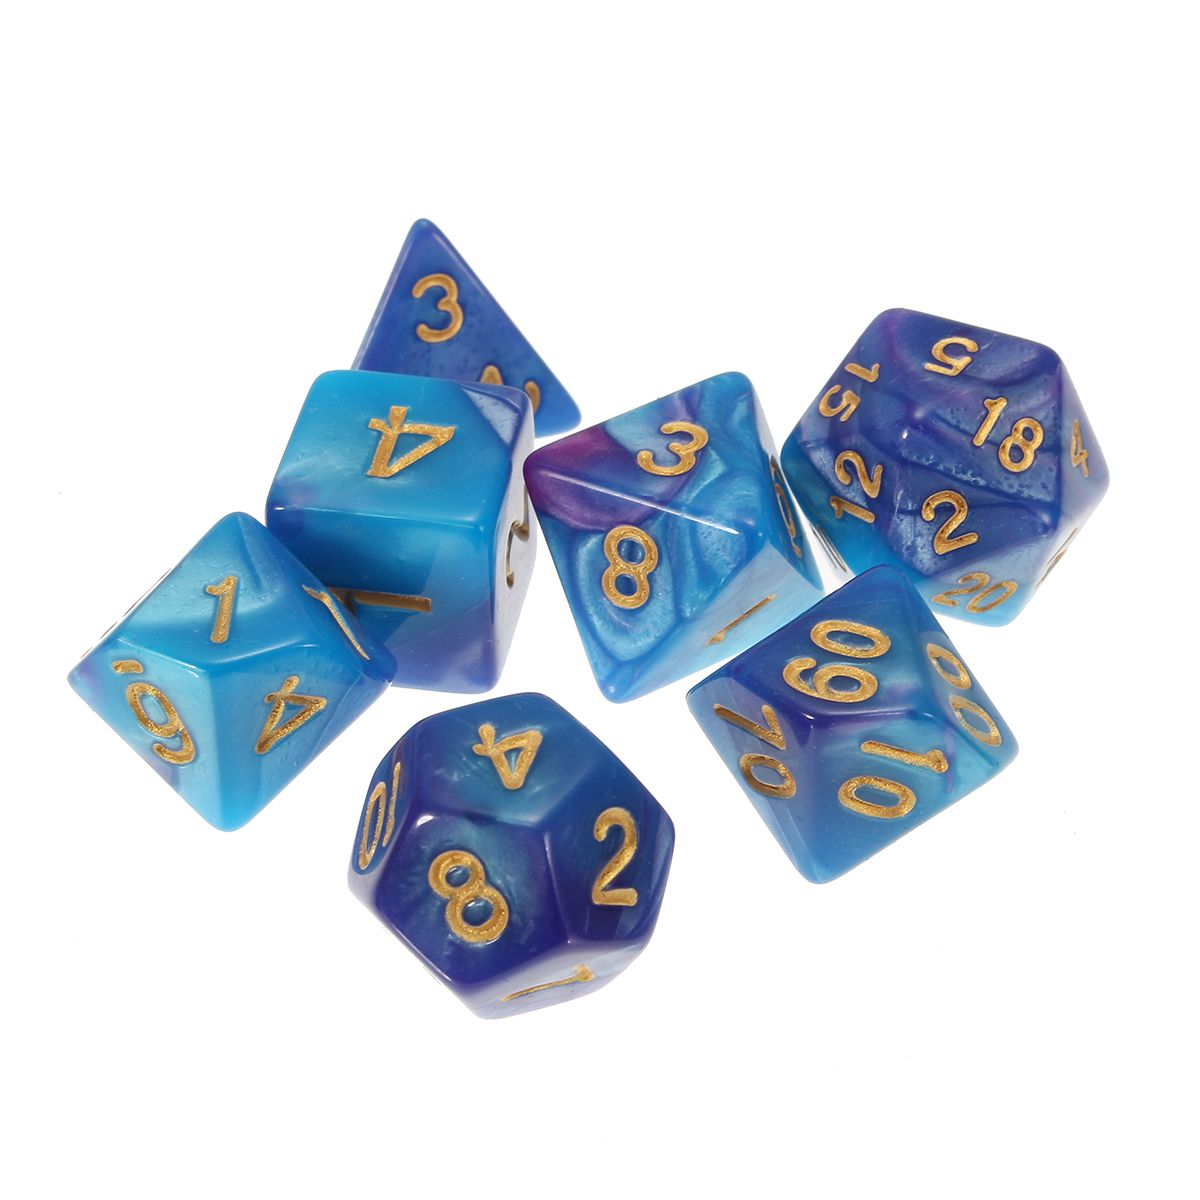 42-Pieces-Polyhedral-Dice-Set-Multisided-Dices-Role-Playing-Games-Gadget-1260359